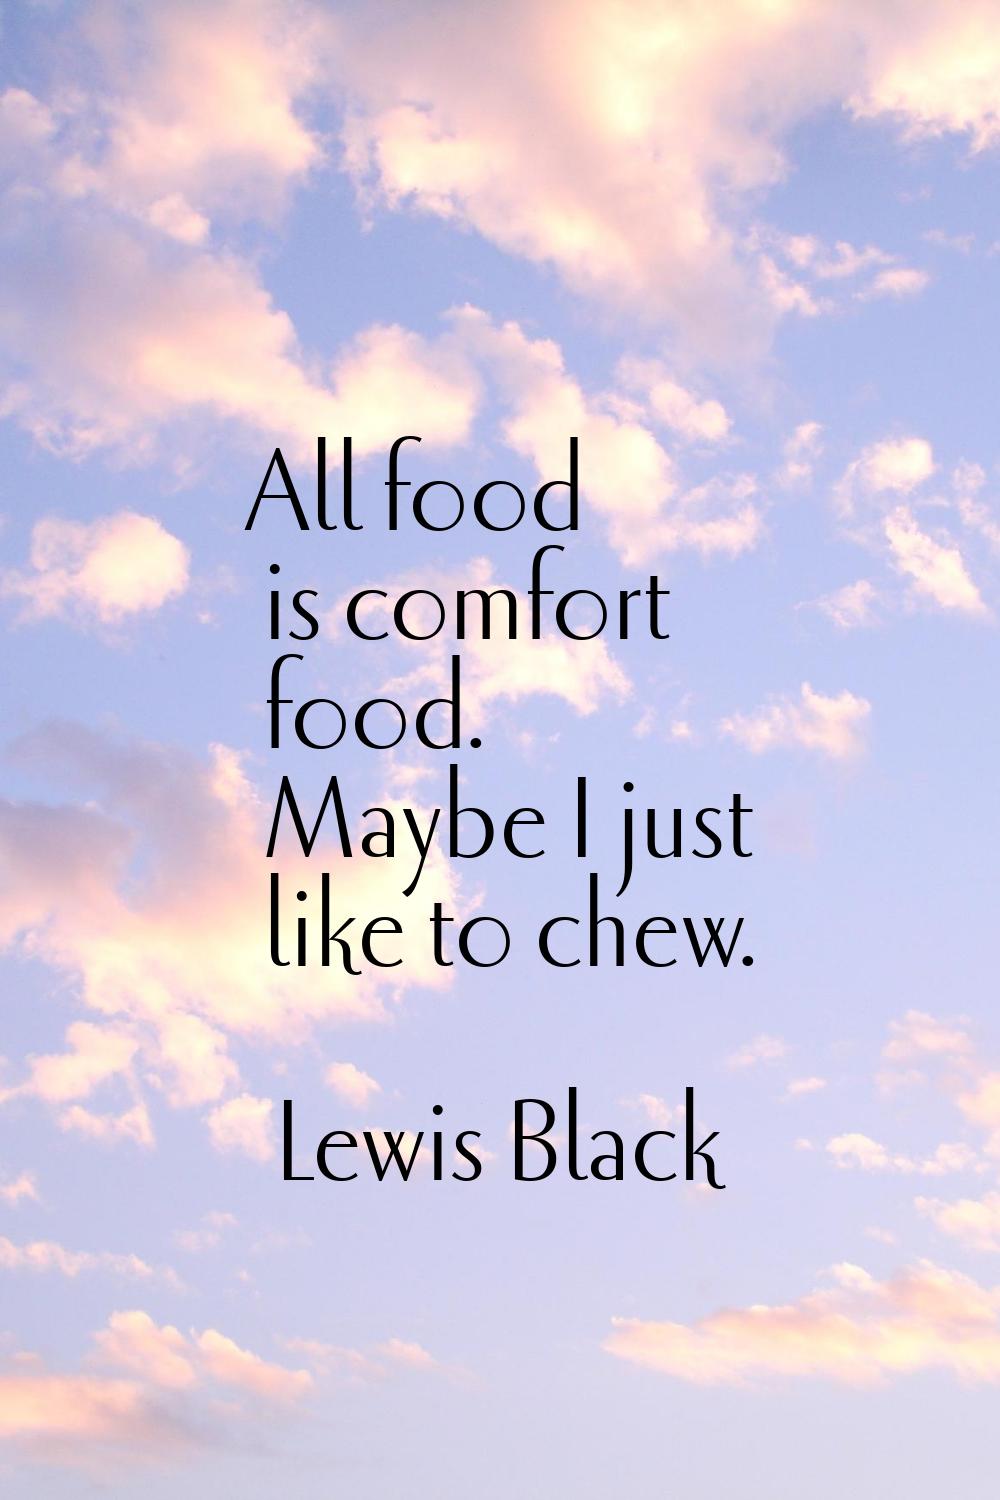 All food is comfort food. Maybe I just like to chew.